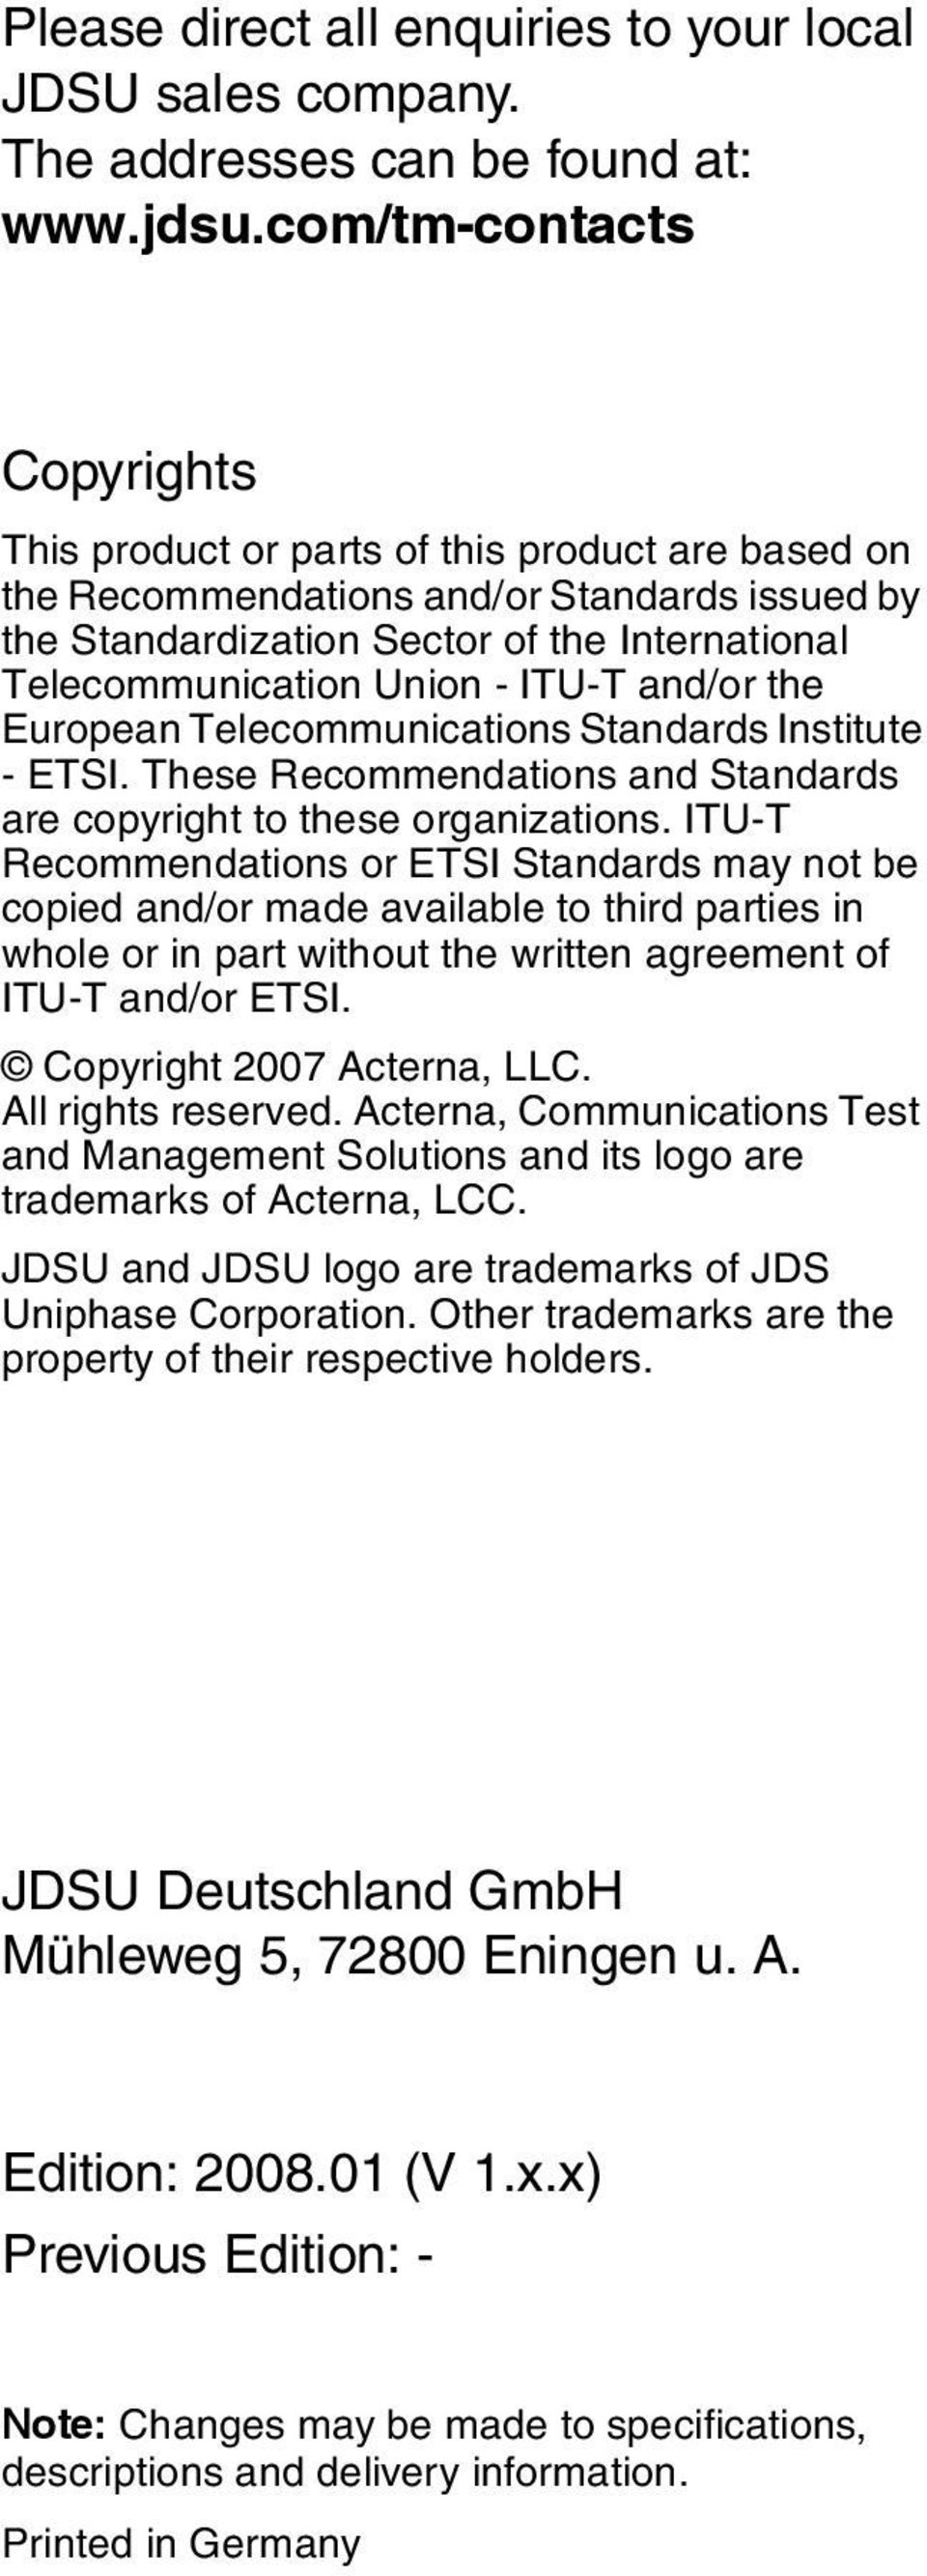 ITU-T and/or the European Telecommunications Standards Institute - ETSI. These Recommendations and Standards are copyright to these organizations.